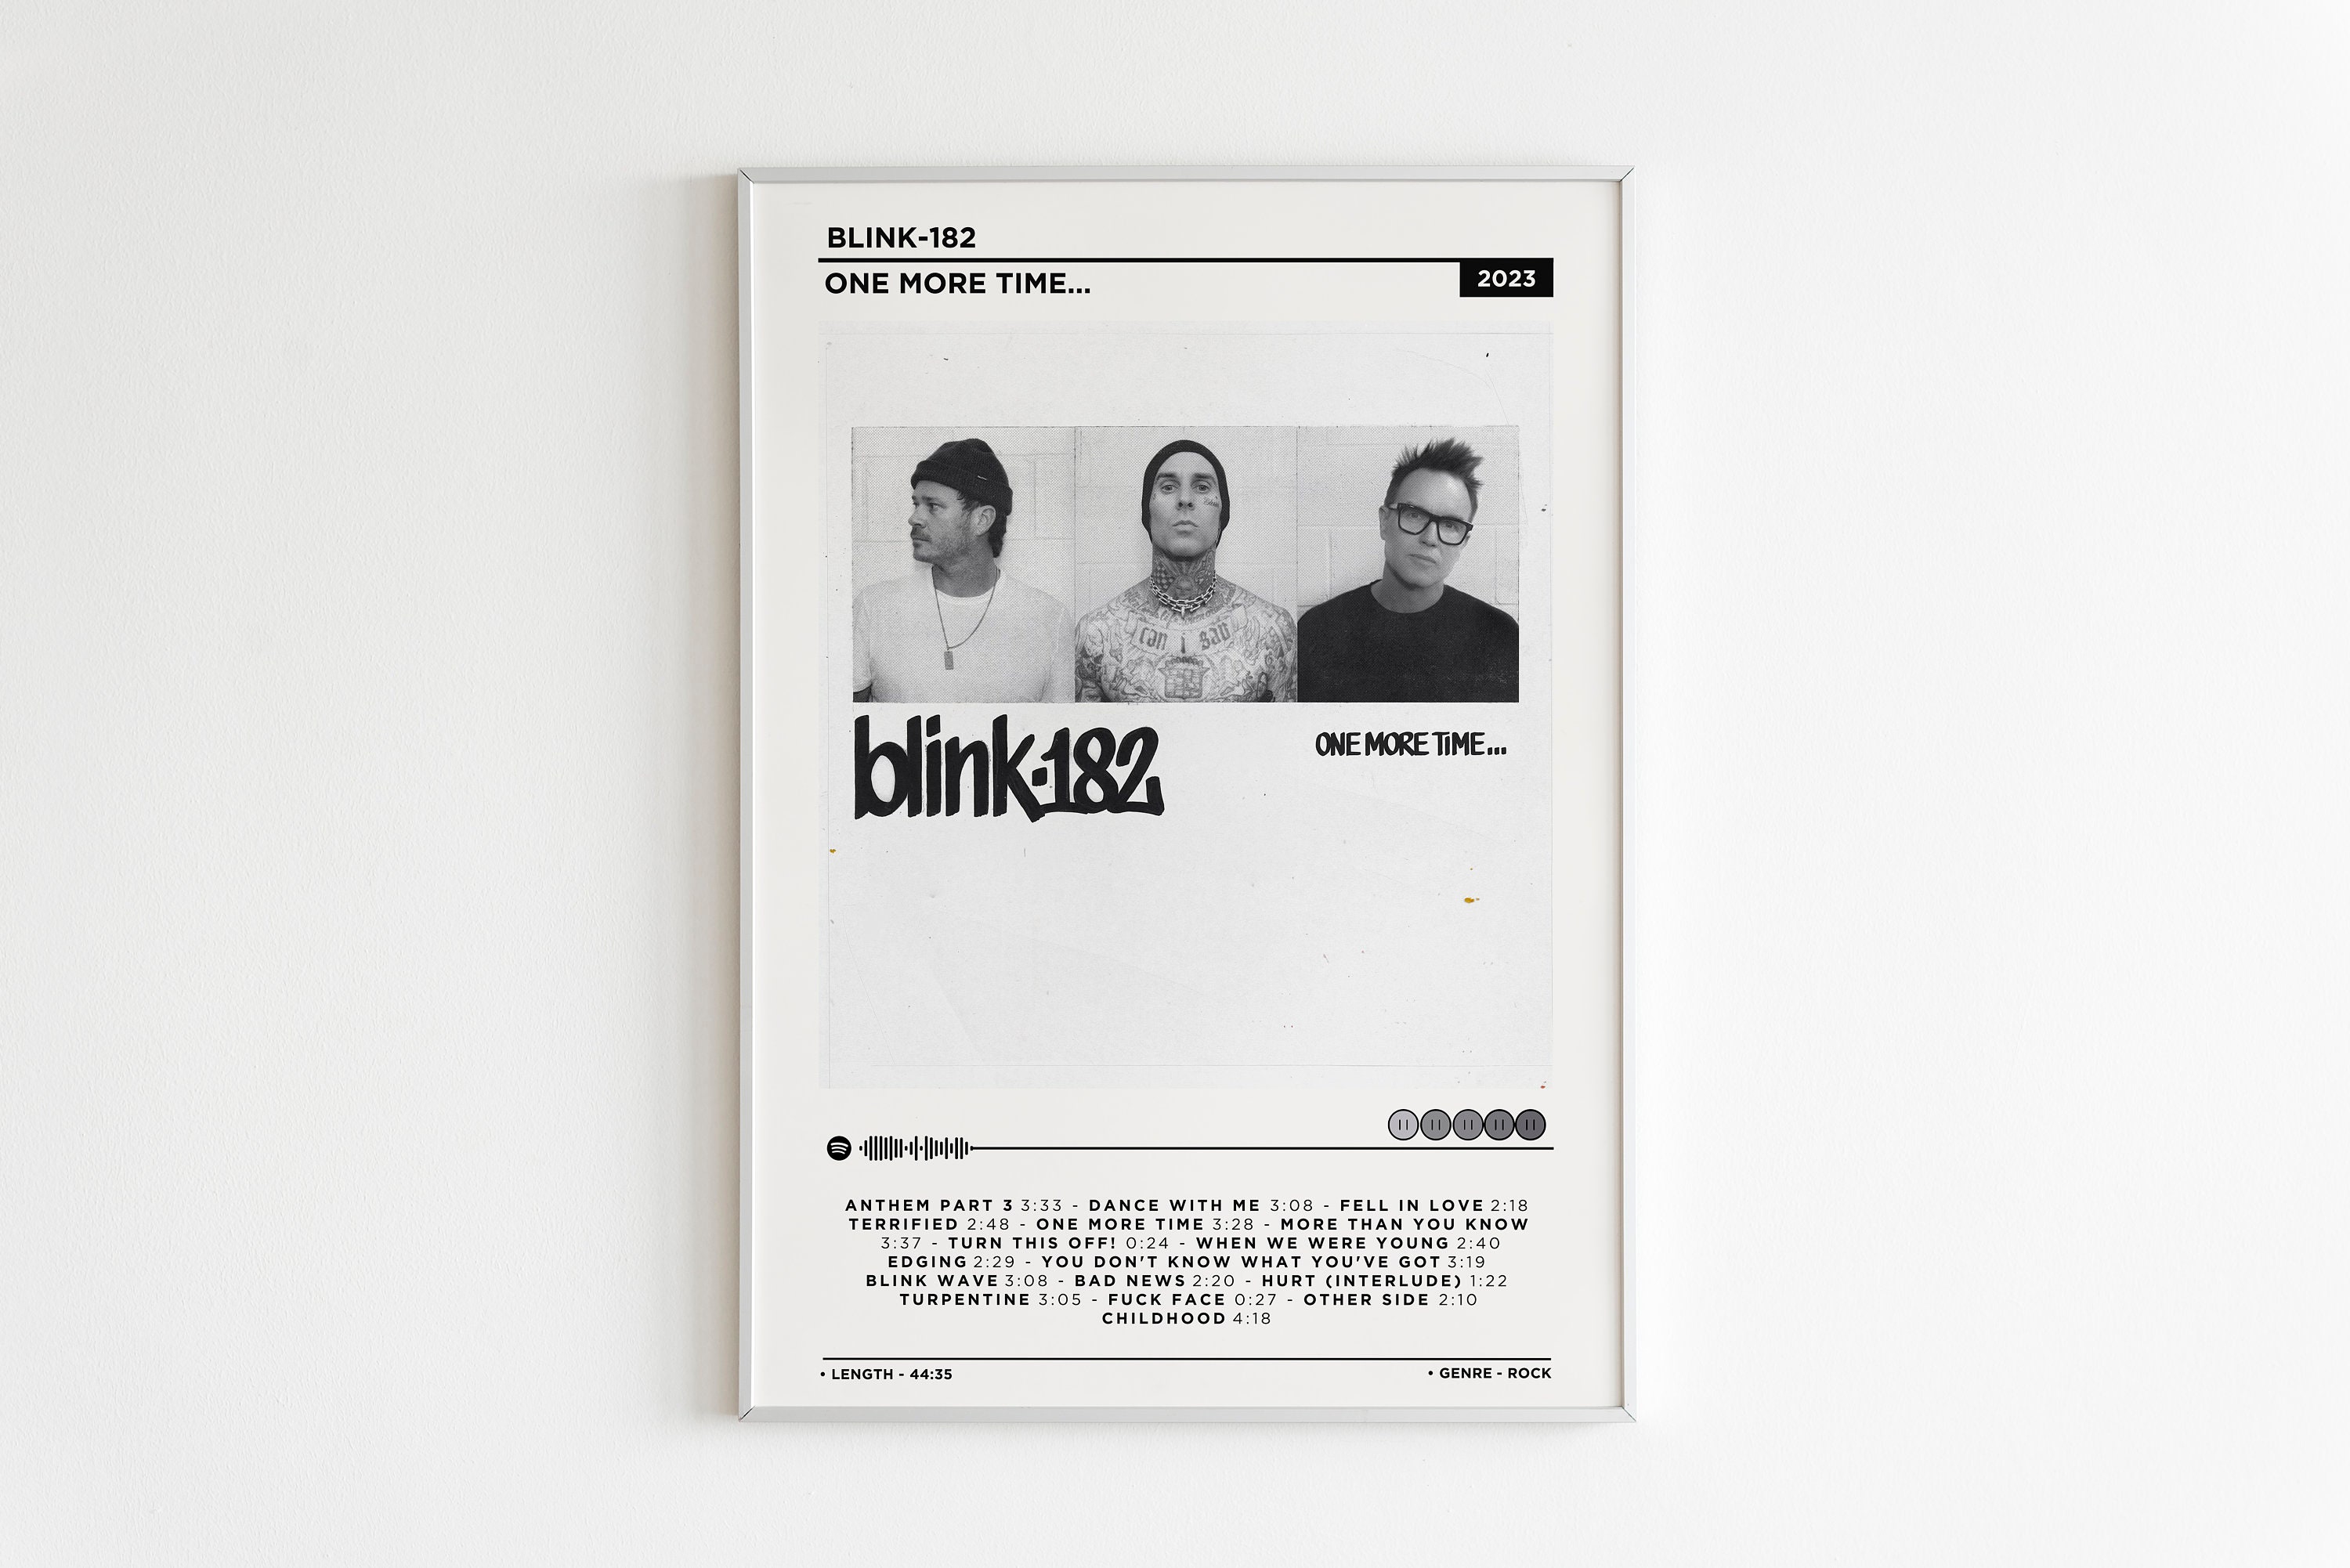 blink-182 - ONE MORE TIME 